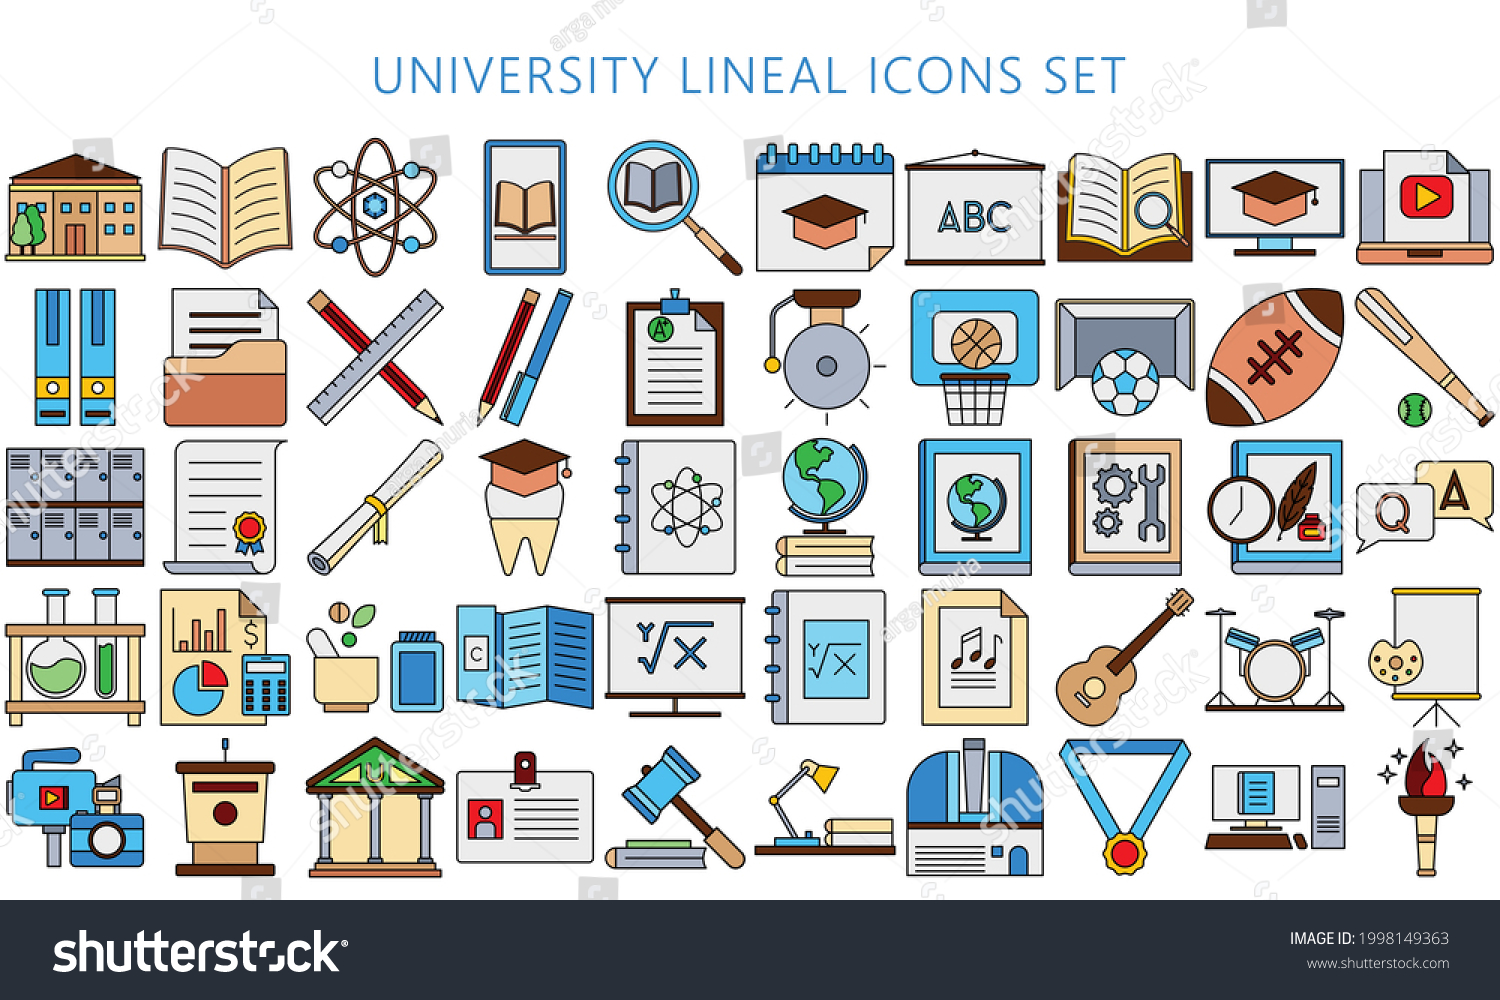 SVG of Simple flat lineal multicolor universities and colleges Icons. Contains Icons any faculty, chemistry. physics, sports mathematics, economic, accounting and others. EPS 10 ready convert to SVG svg